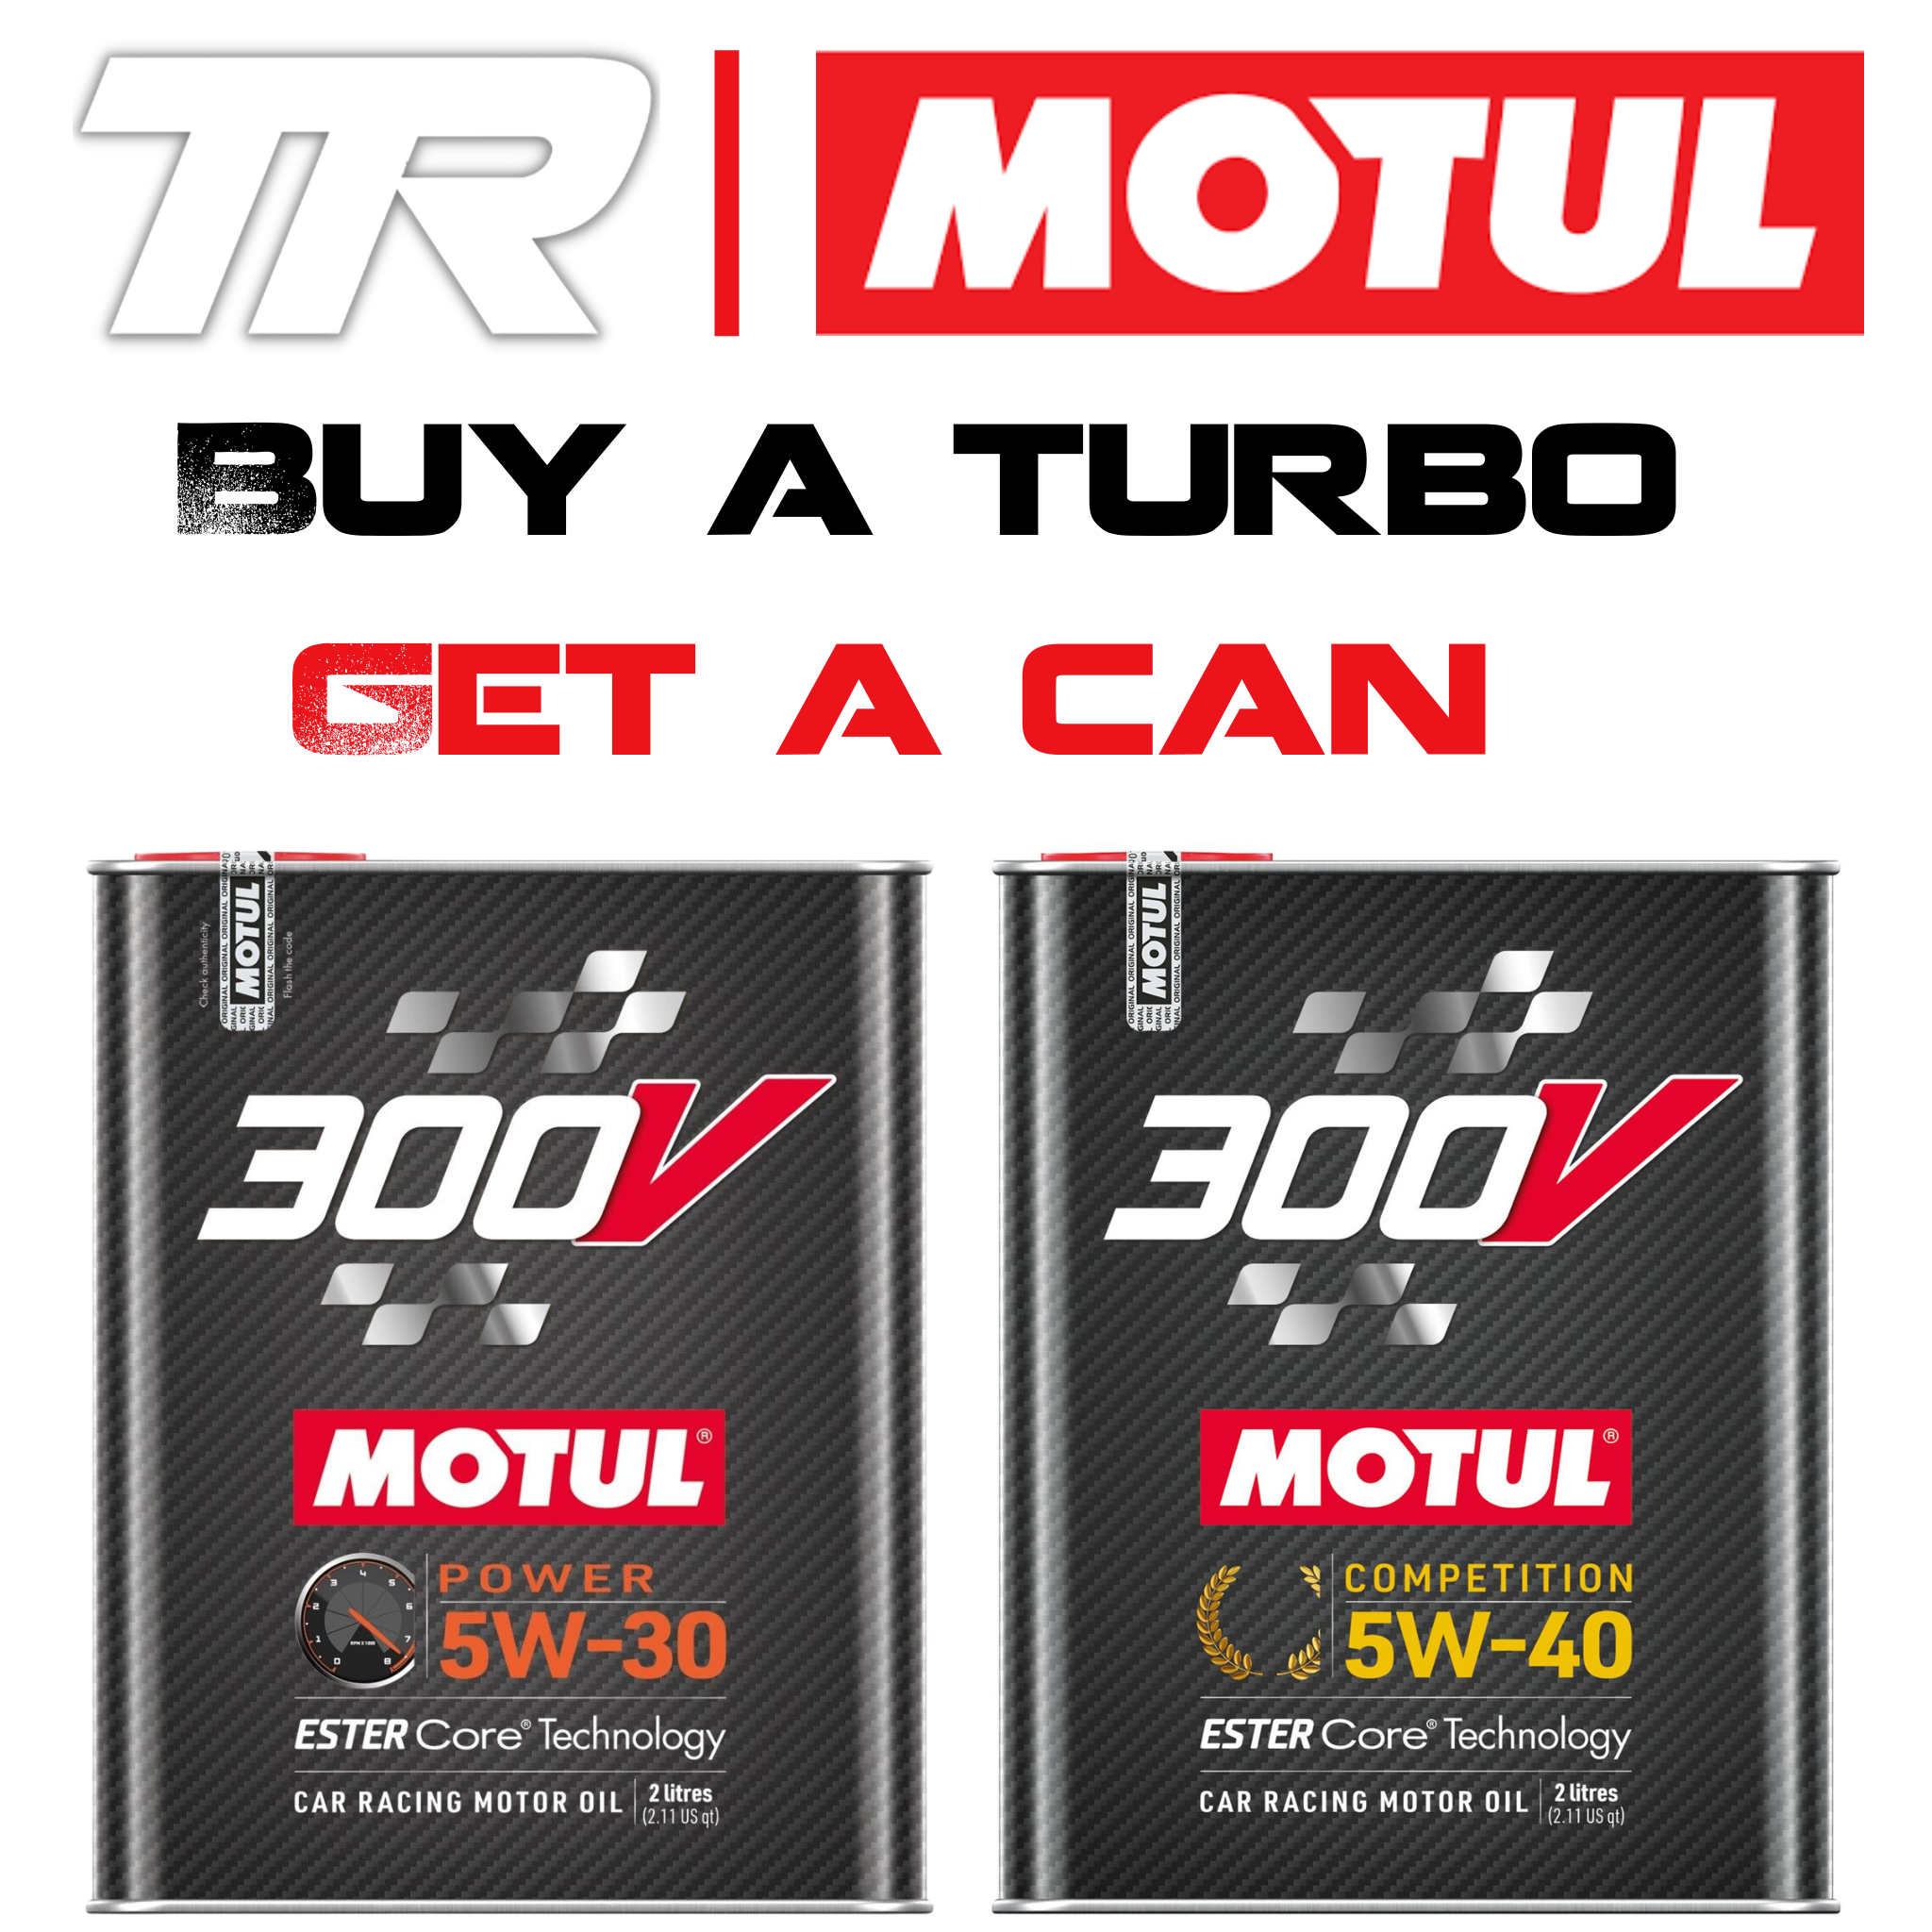 TR GTX29 Turbo for Subaru WRX 2015+ & Forester 2014+ FA20DIT (Gen II) and Motul 300V Power &  Competition